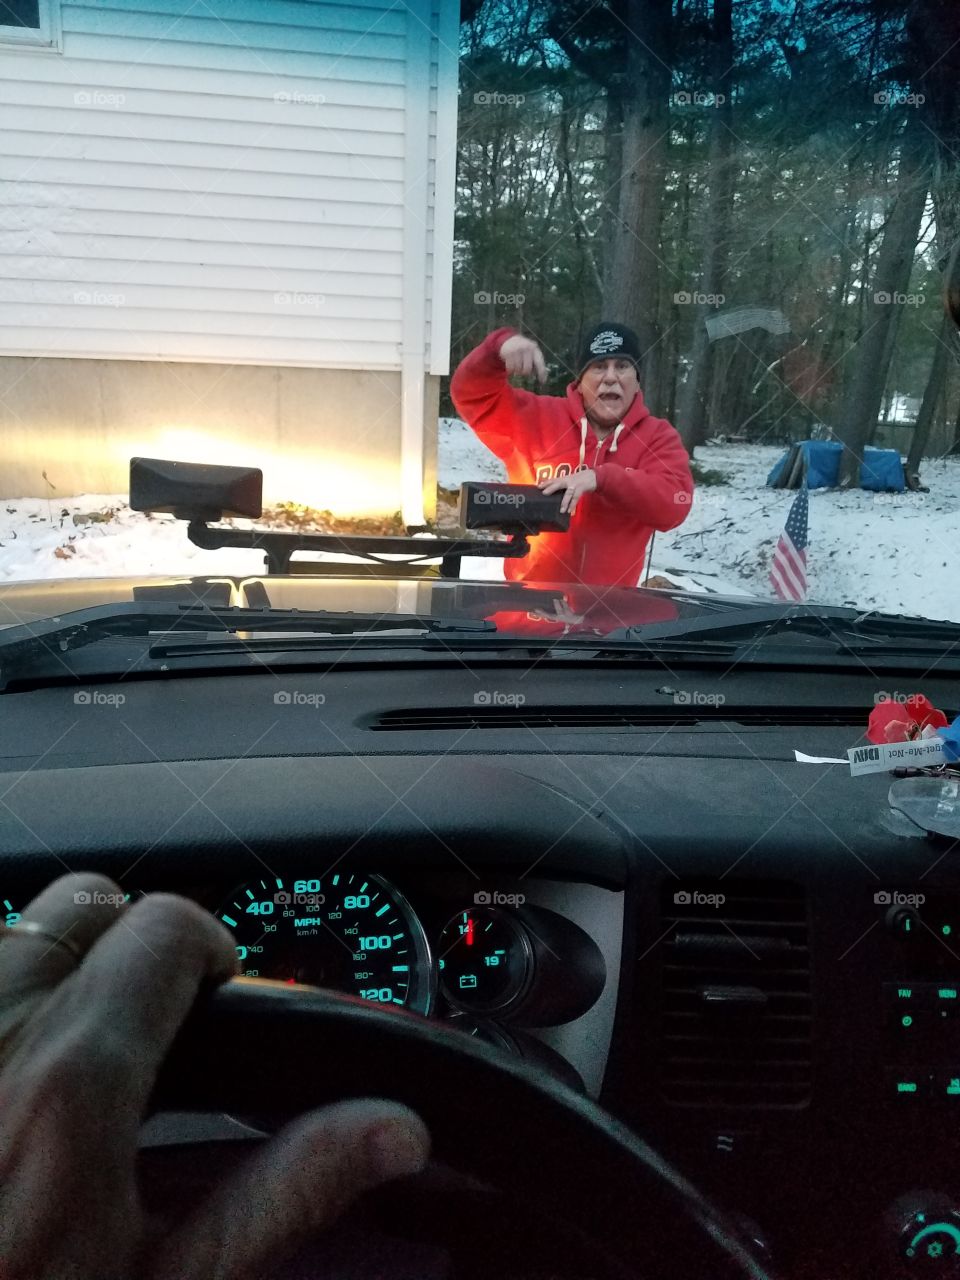 Getting hand signals to drive into plow & hook it up. Hubby outside, wifey inside with controls. Snowstorm  coming.